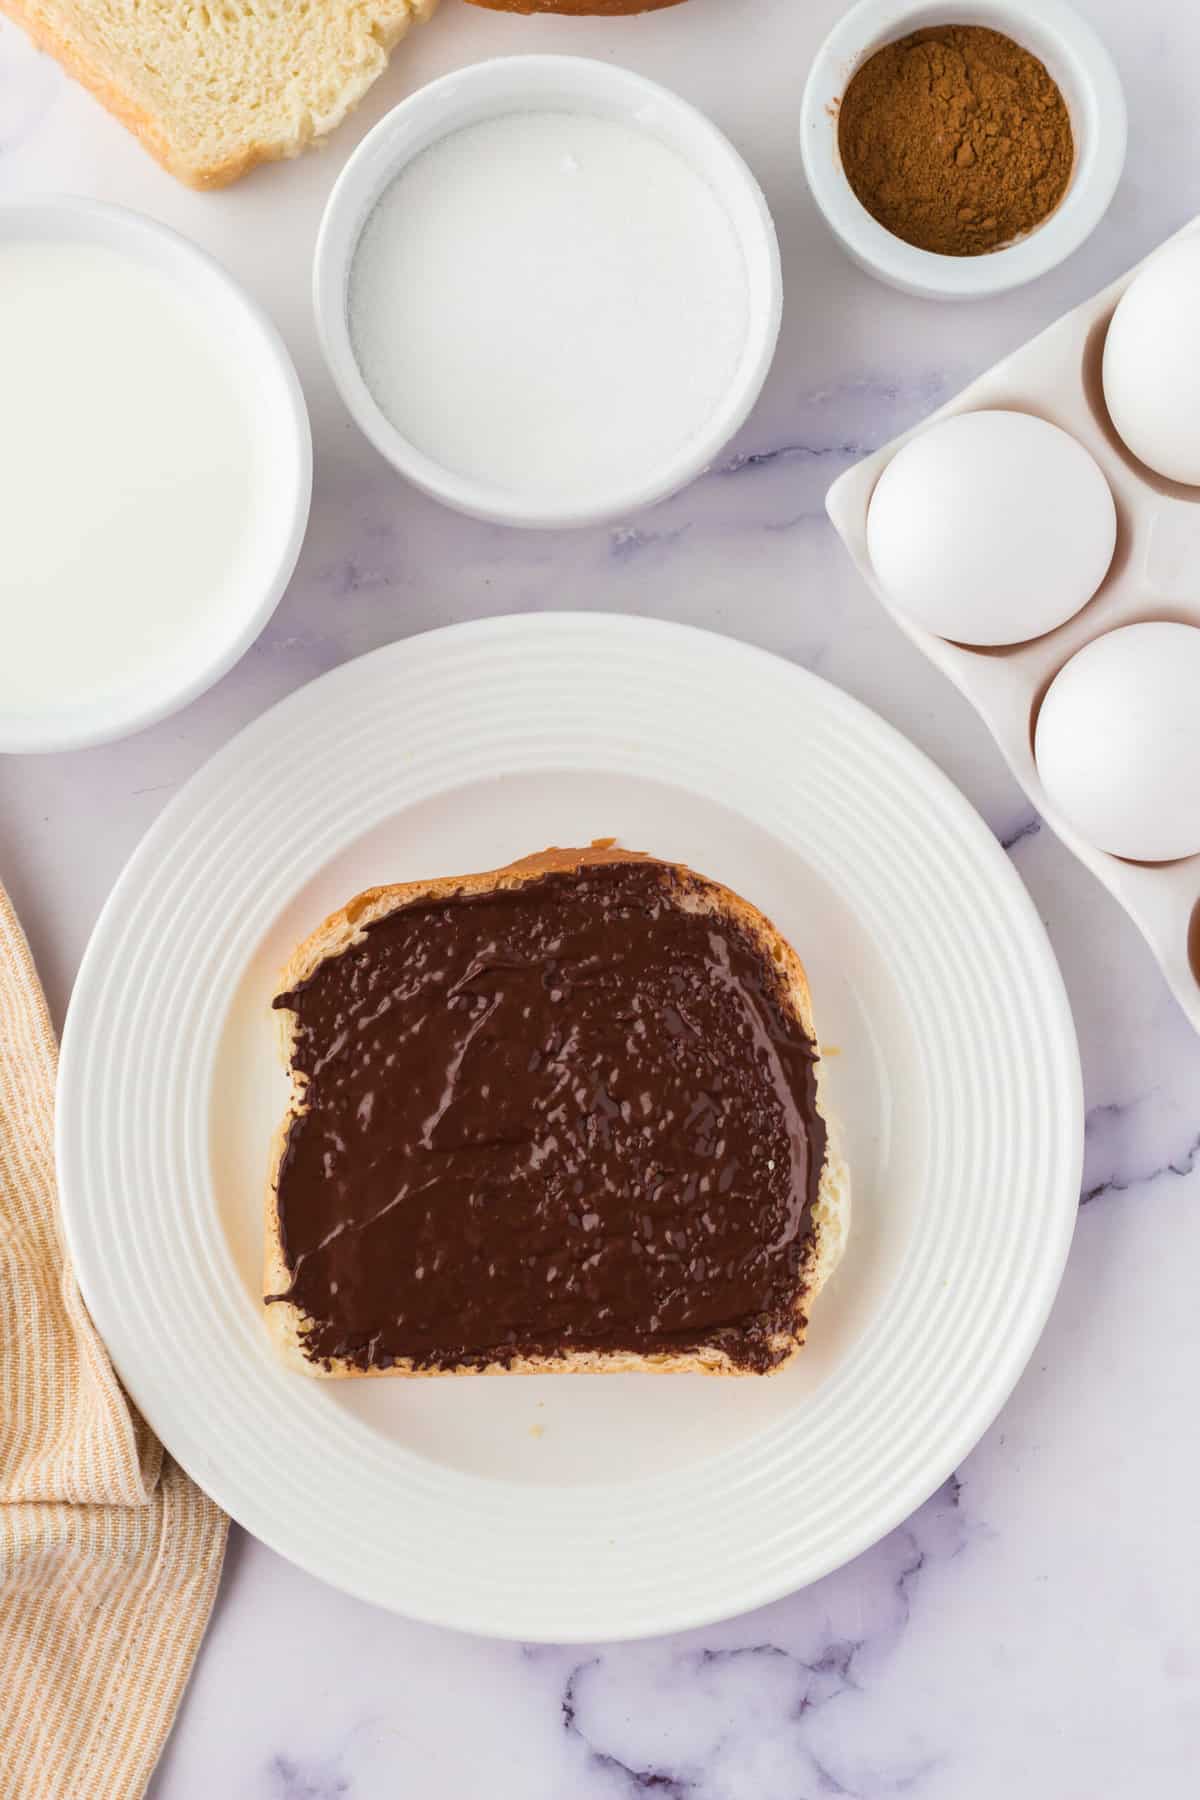 Nutella spread over the top of a piece of bread on a plate with a bowl of milk, sugar and cinnamon the side with a carton of eggs